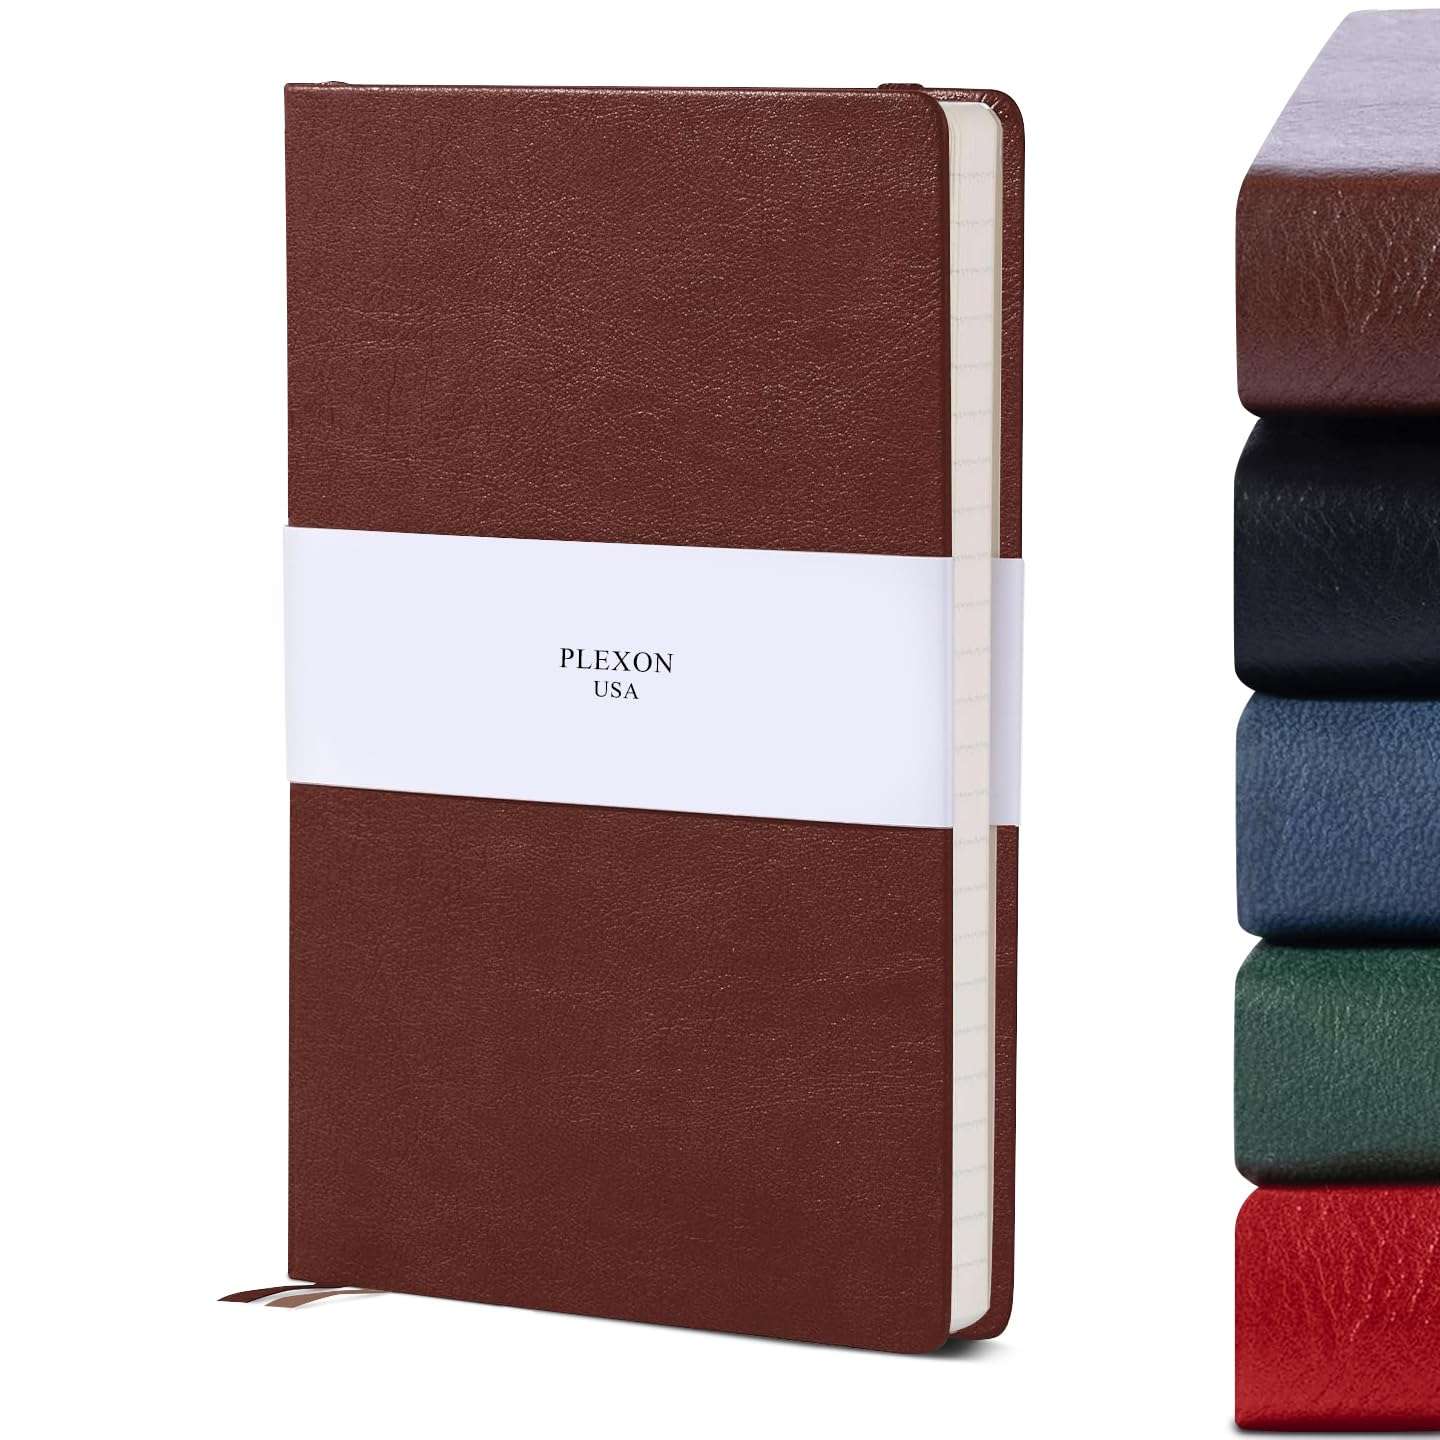 Chestnut Brown A5 Hardcover Vegan Leather Squared Notebook with 120 gsm Graph Cream Paper and Gift Box, 80 Sheets - 1